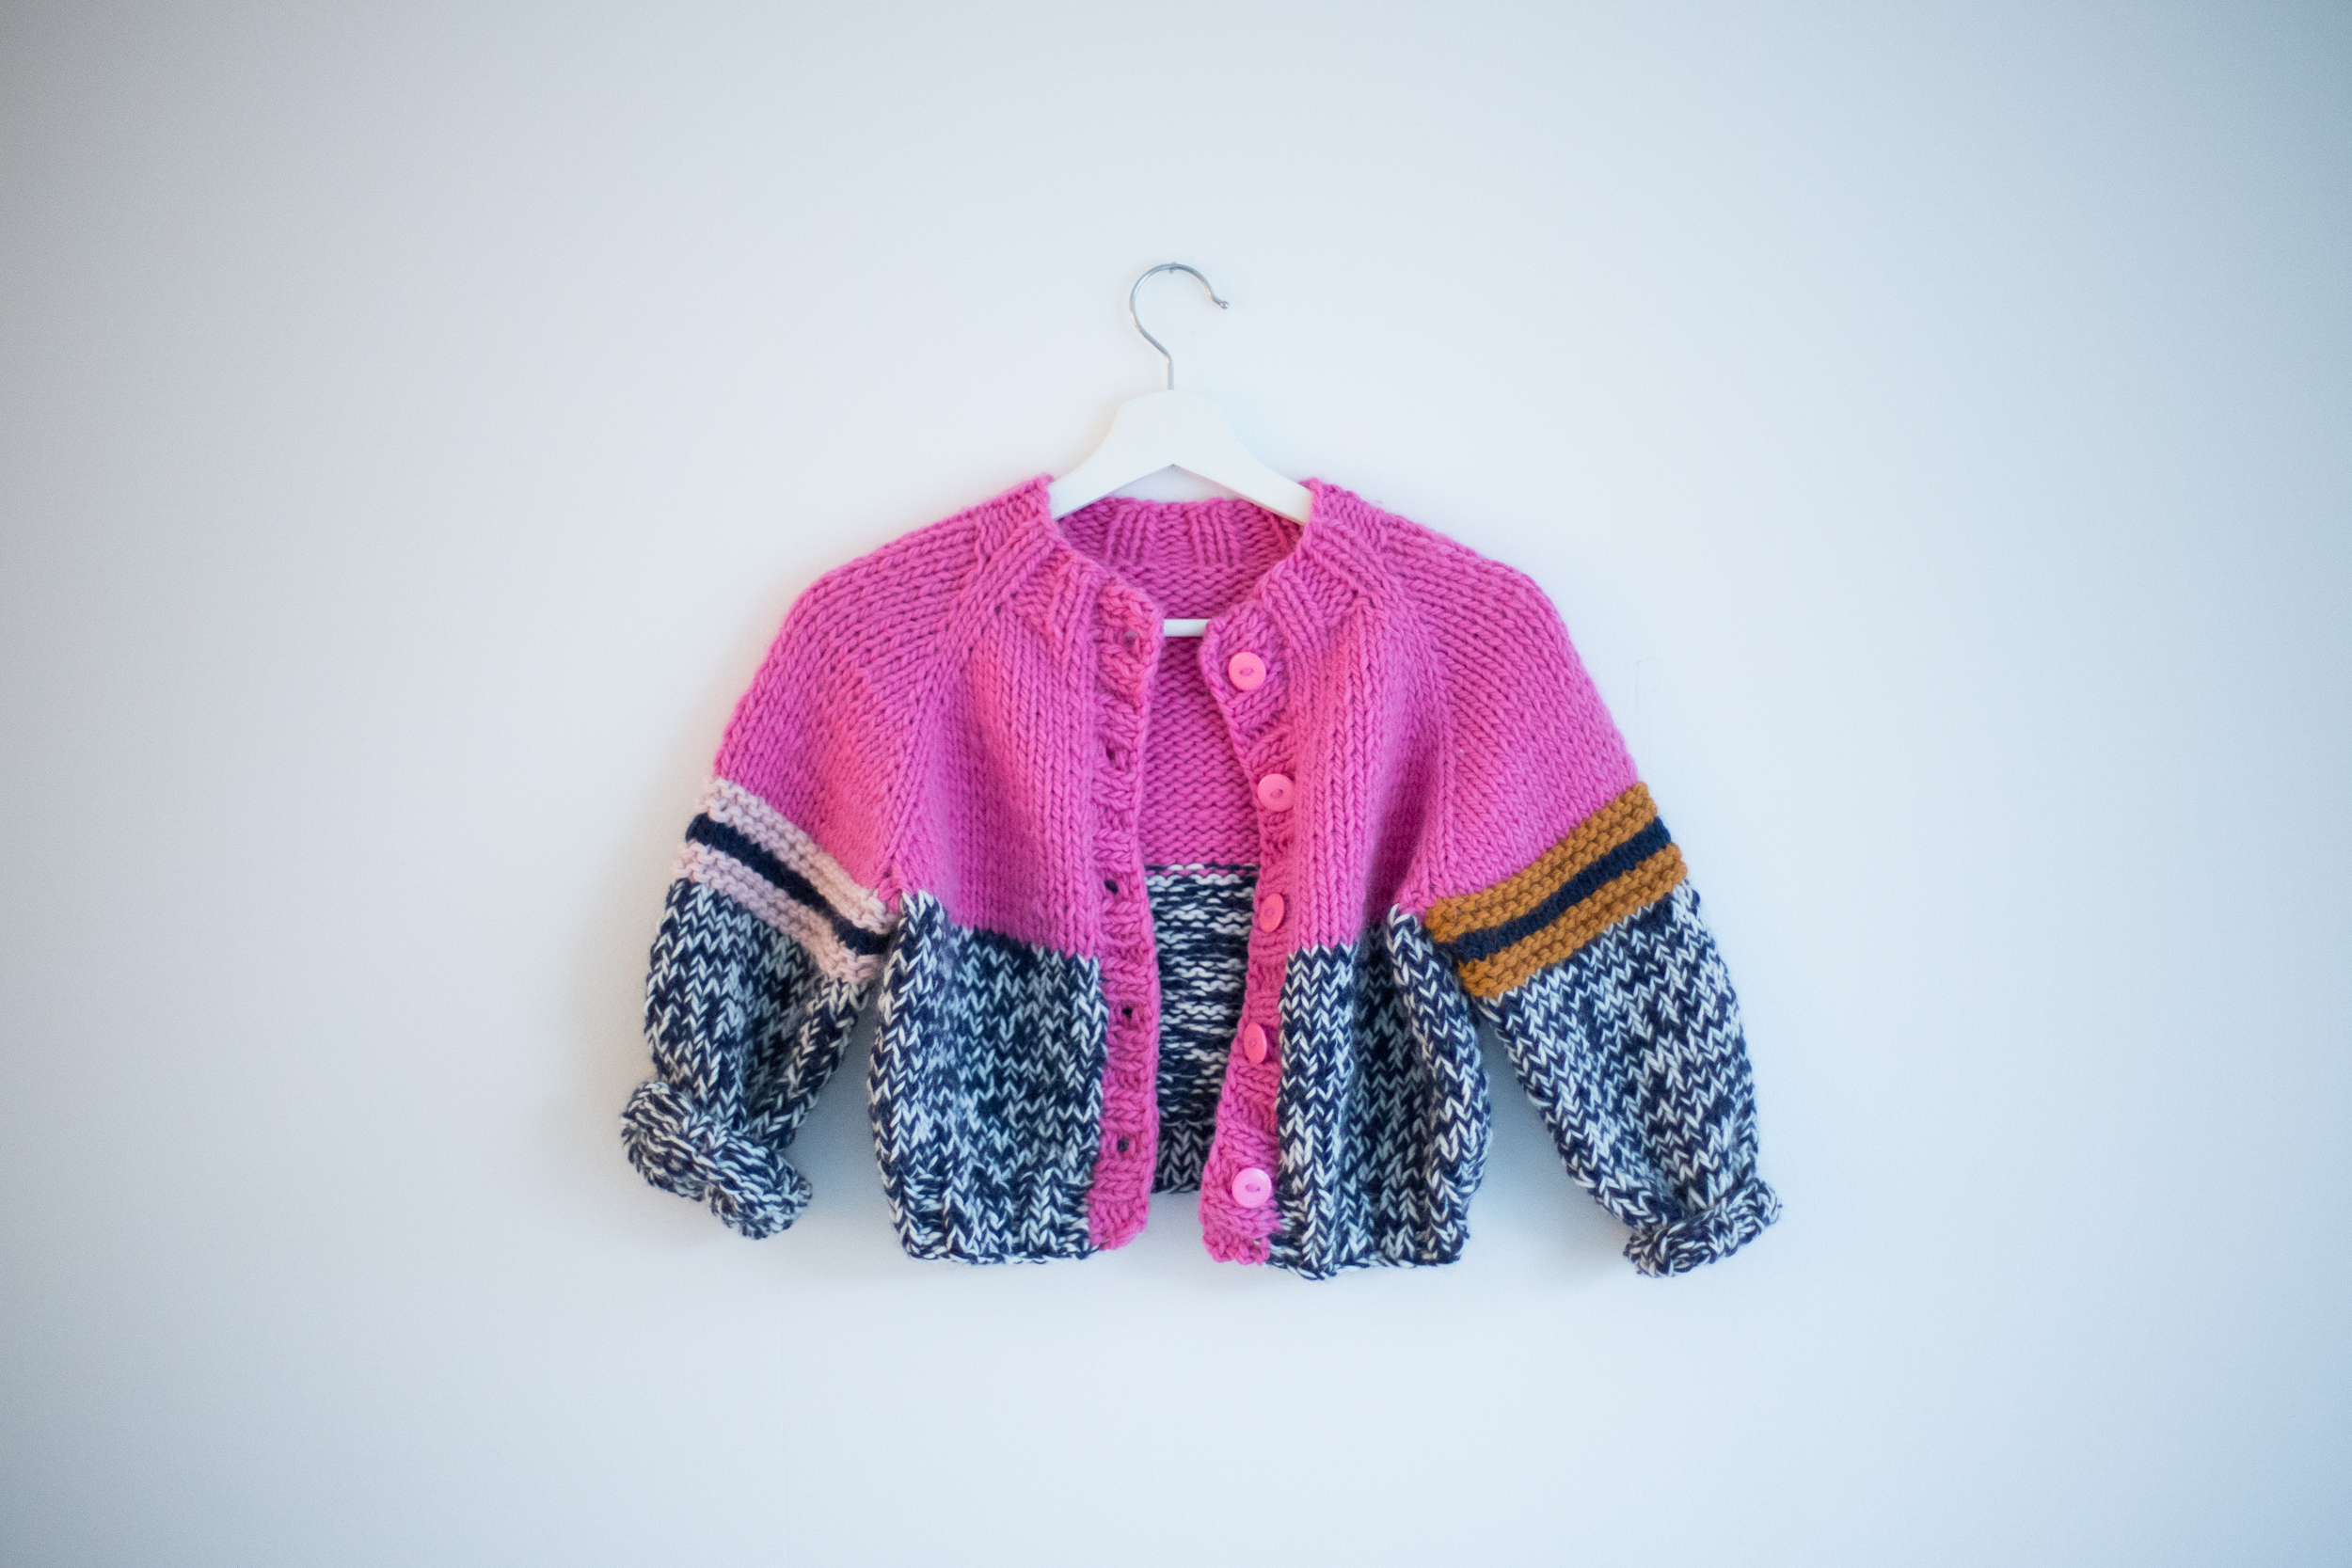  - POP JACKET knitting pattern for kids | Fun and colorful knit | Knit for kids - 06/11/2017